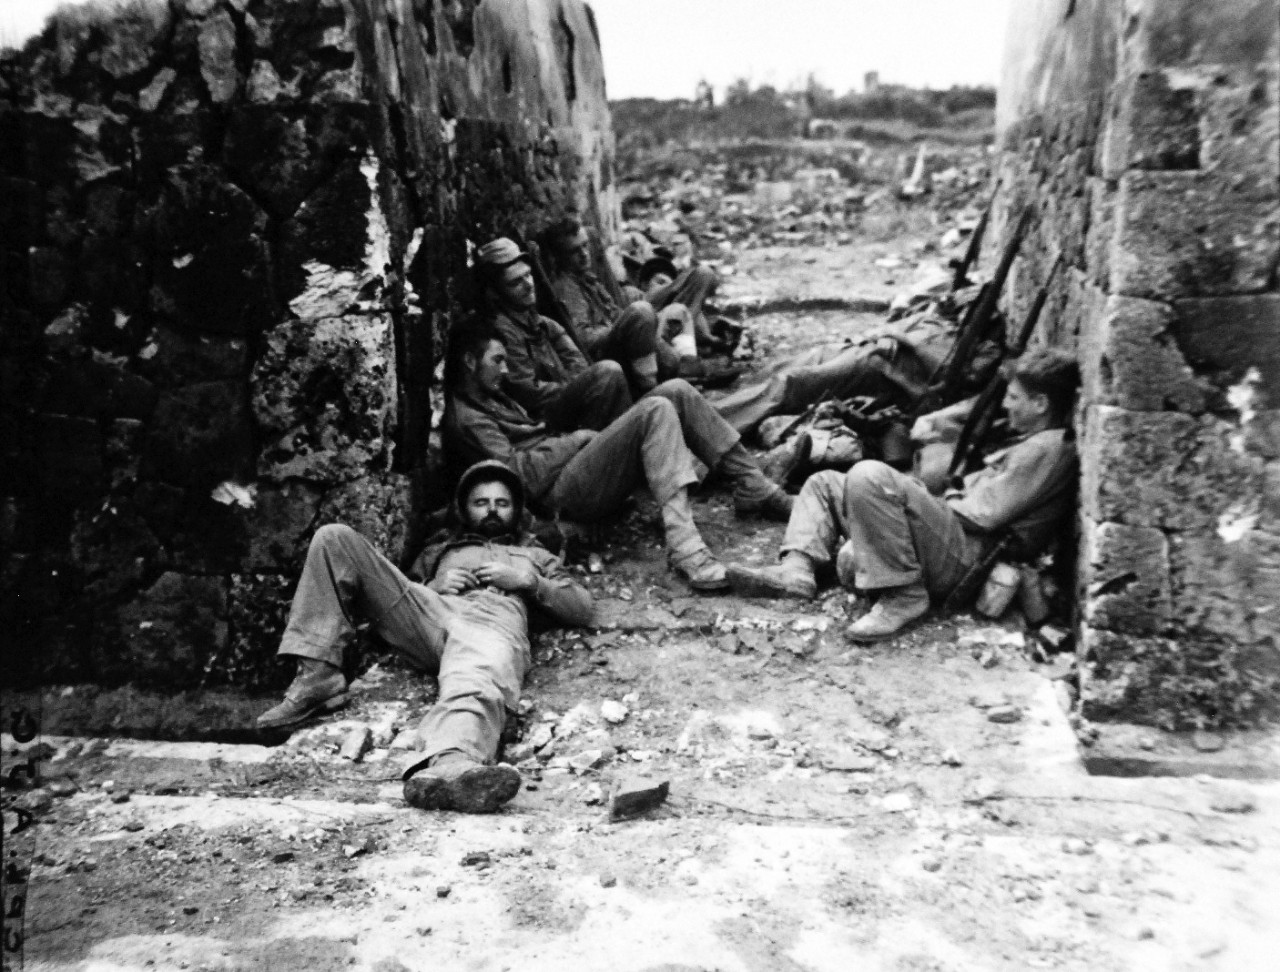 127-GW-518-122511:   Okinawa Campaign, April-June 1945.     Marines of the 60 Mortars George Company, 22nd Marines, Second Battalion, rest after hard night fighting.  This was taken in Naha, Okinawa.   Photographed by Giossi, May 29, 1945. Official U.S. Navy Photograph, now in the collections of the National Archives.   (2014/6/25). 